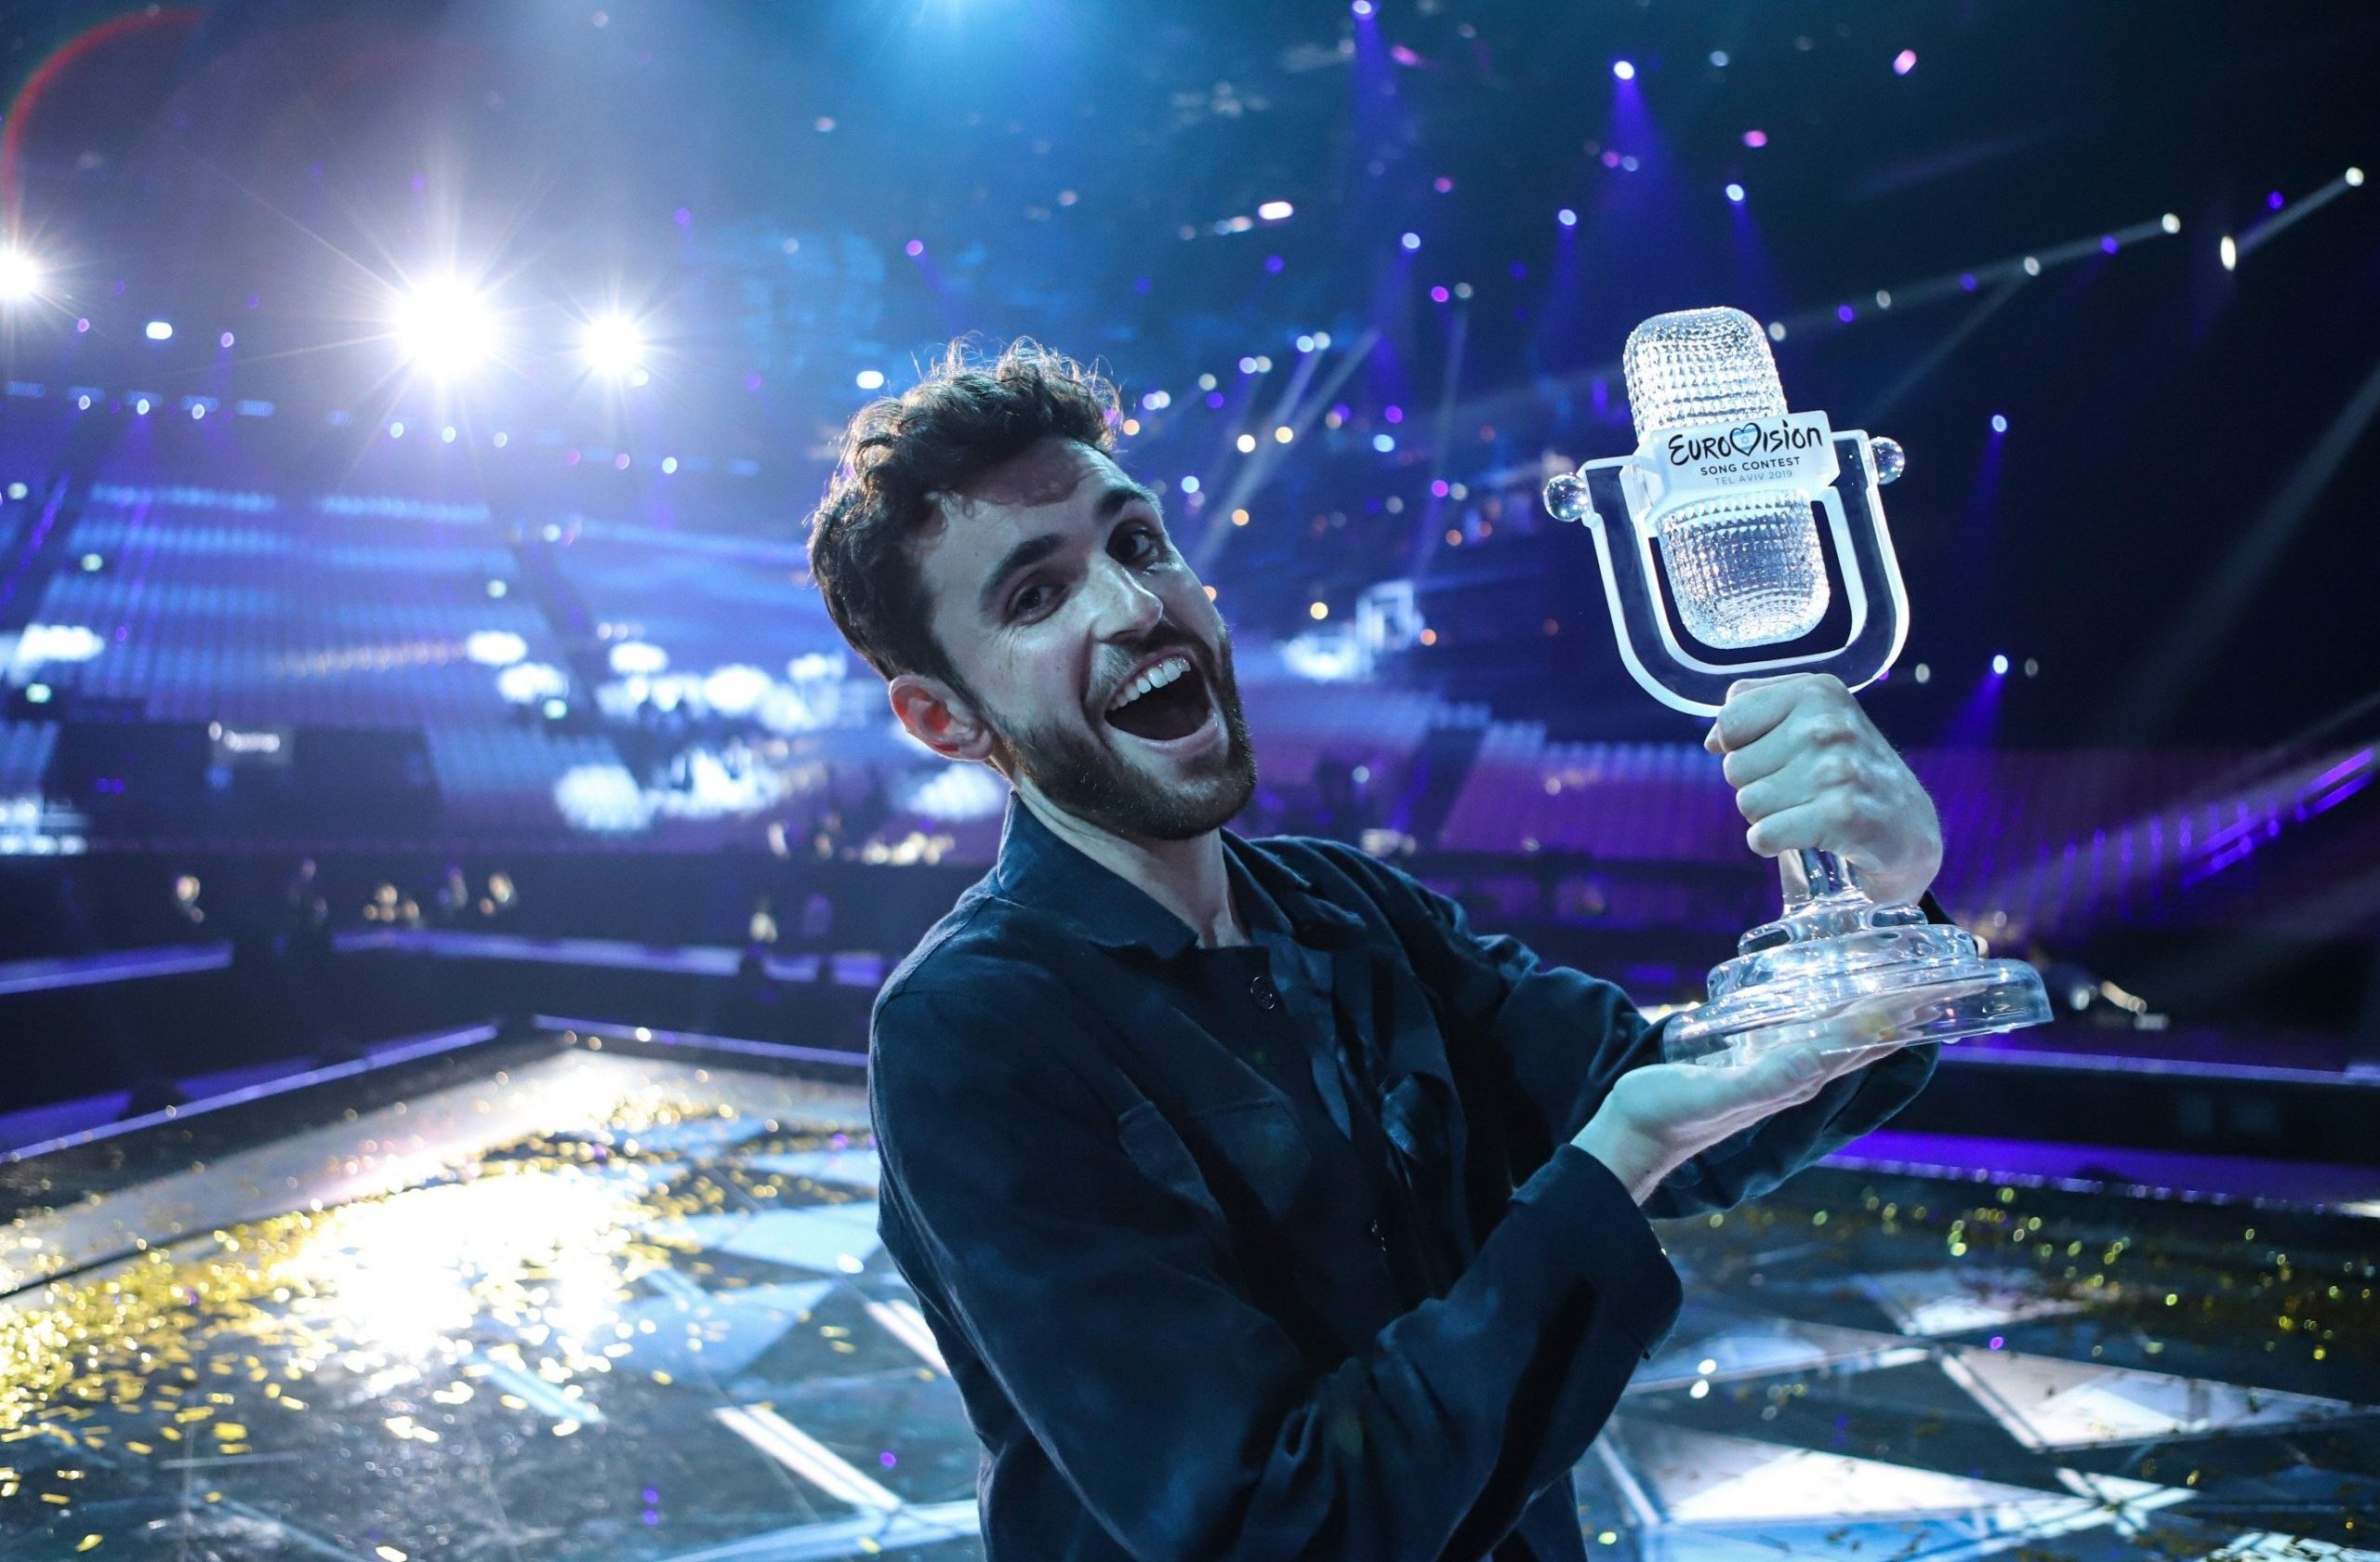 Duncan Laurence Países Bajos 2019